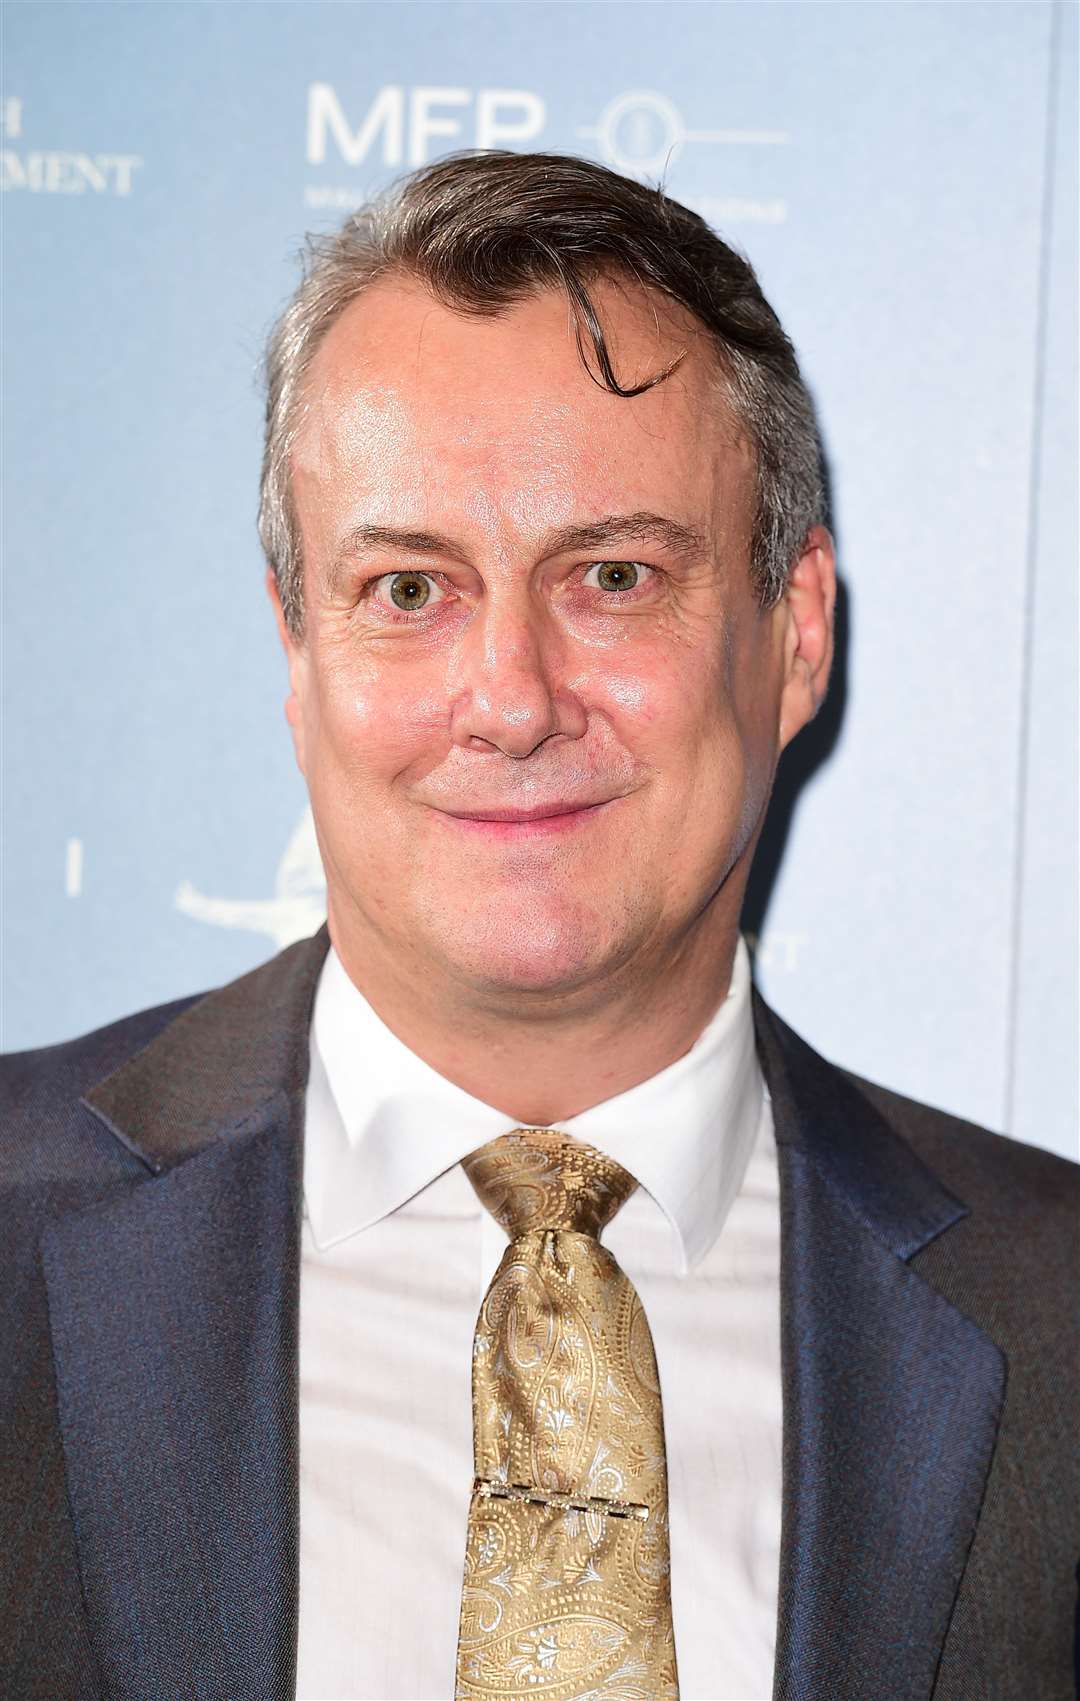 Stephen Tompkinson will face trial next year (Ian West/PA)